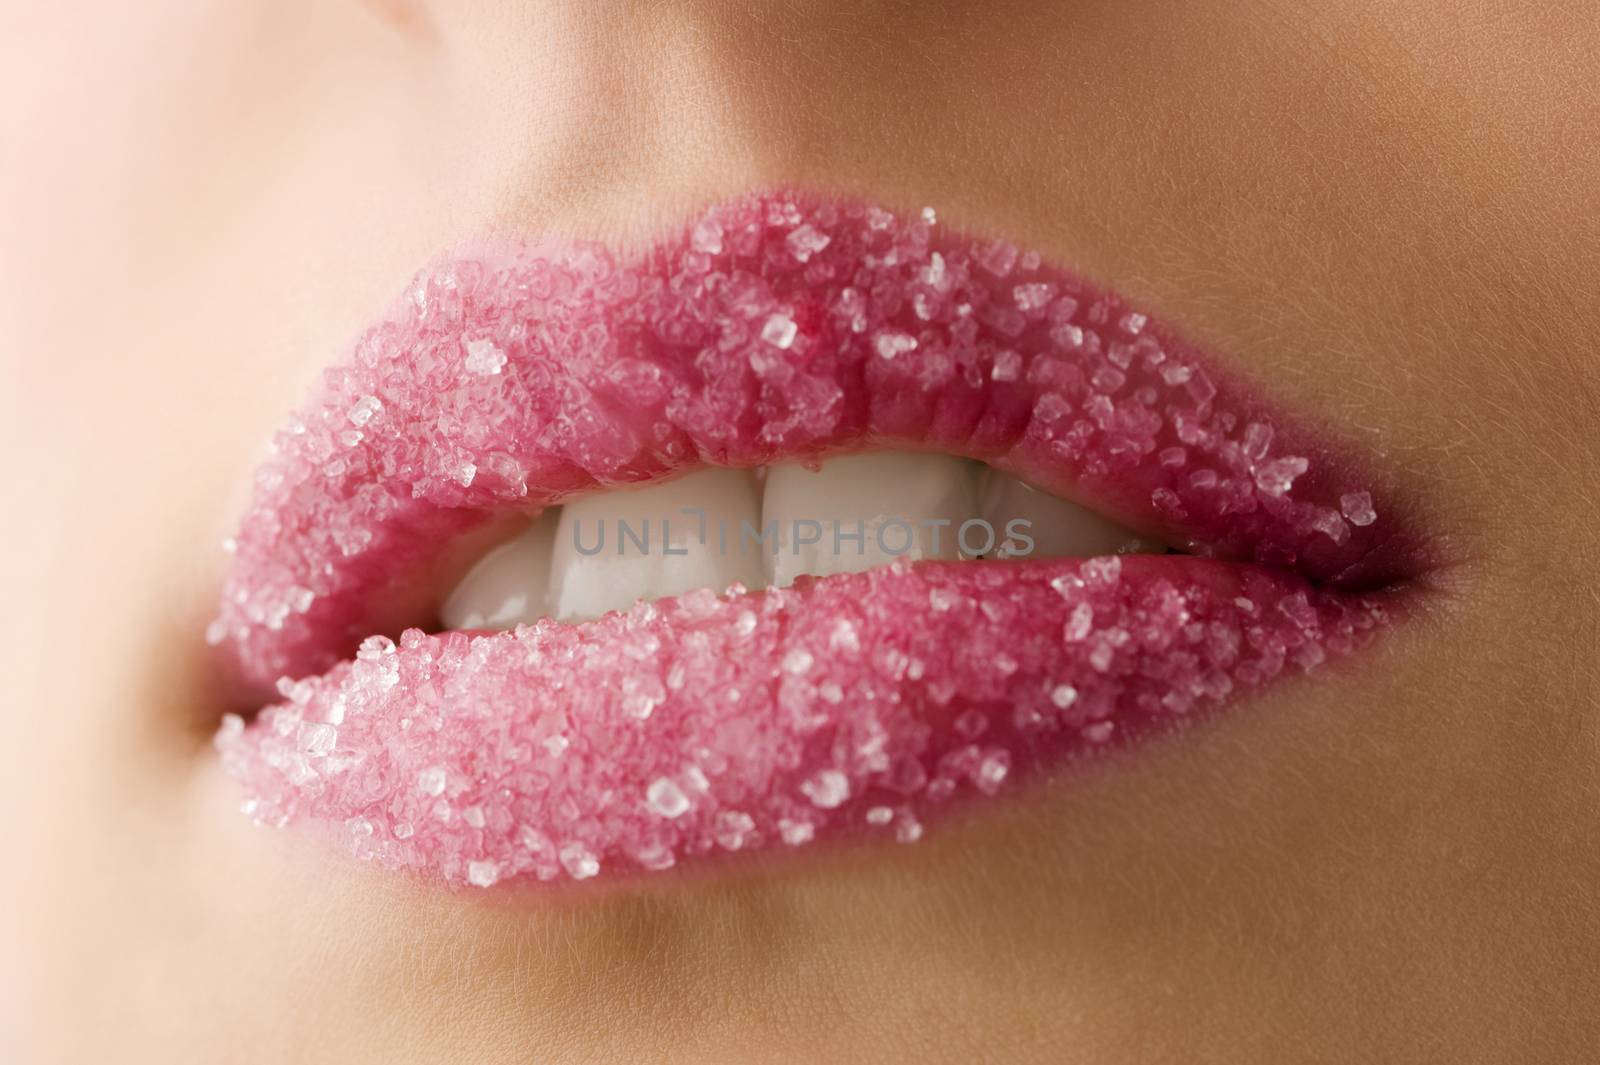 Woman's red lips coated with scattered sugar showing tooth